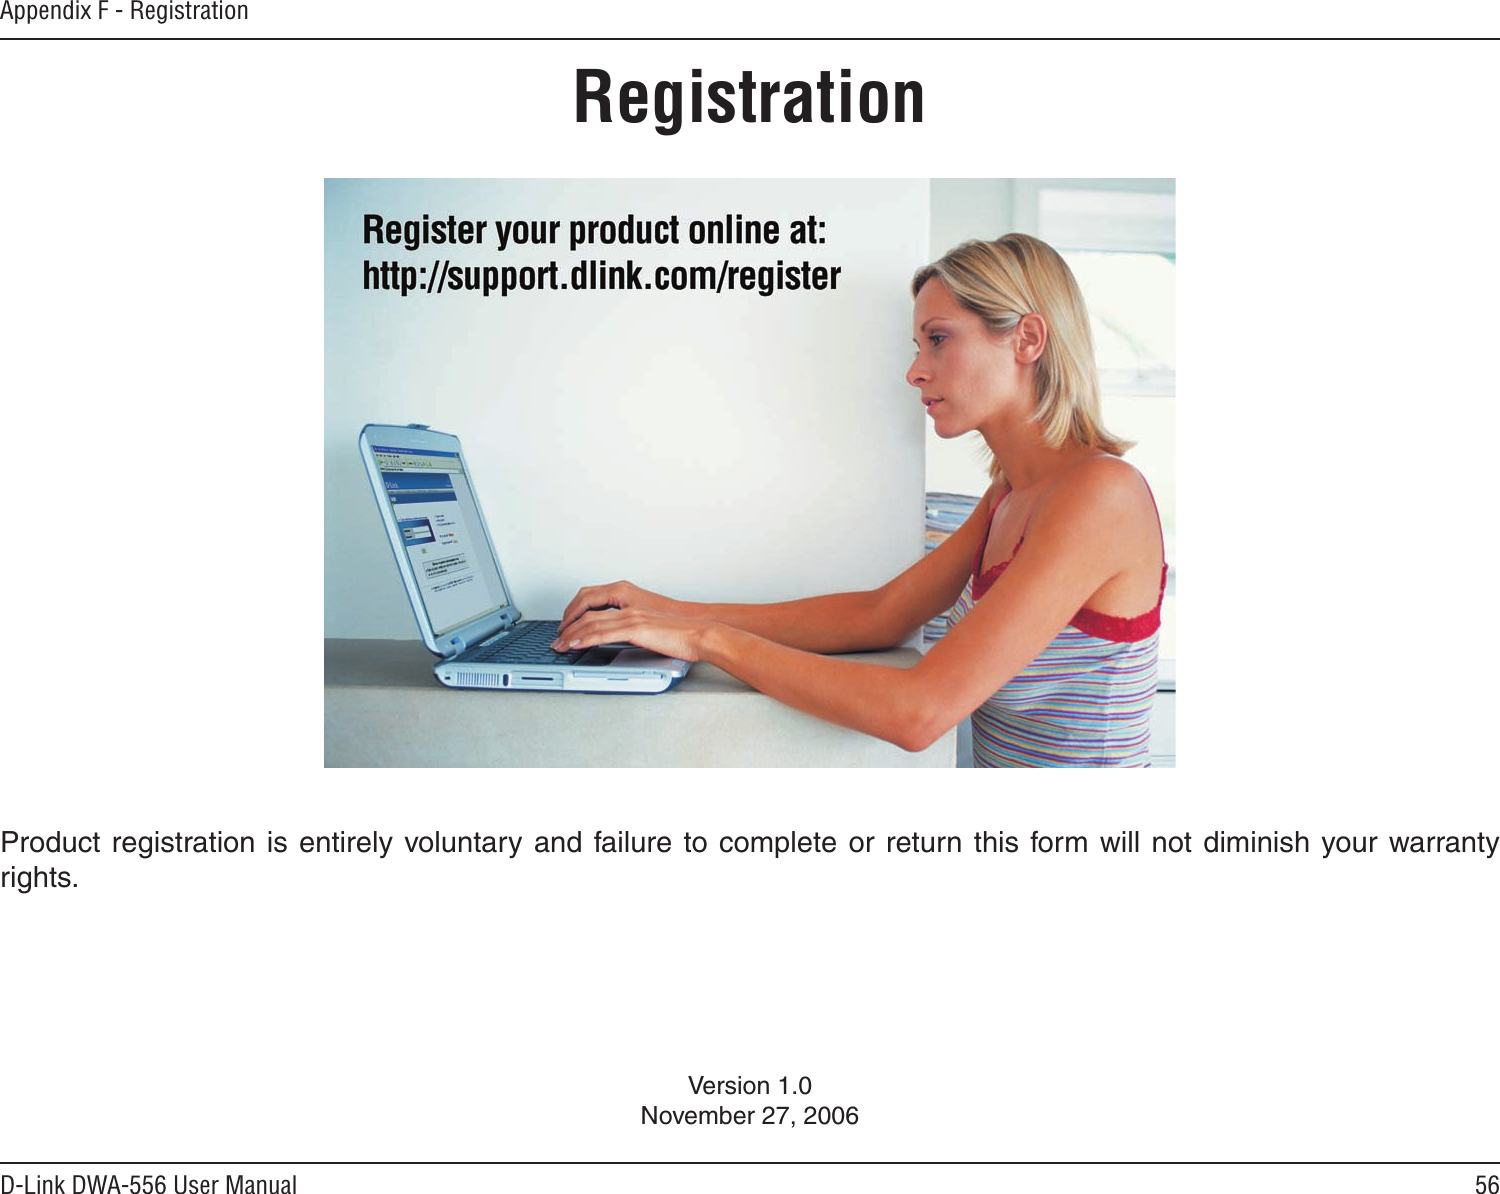 56D-Link DWA-556 User ManualAppendix F - RegistrationVersion 1.0November 27, 2006Product registration is entirely voluntary  and failure to complete  or return this form will  not diminish your warranty rights.Registration